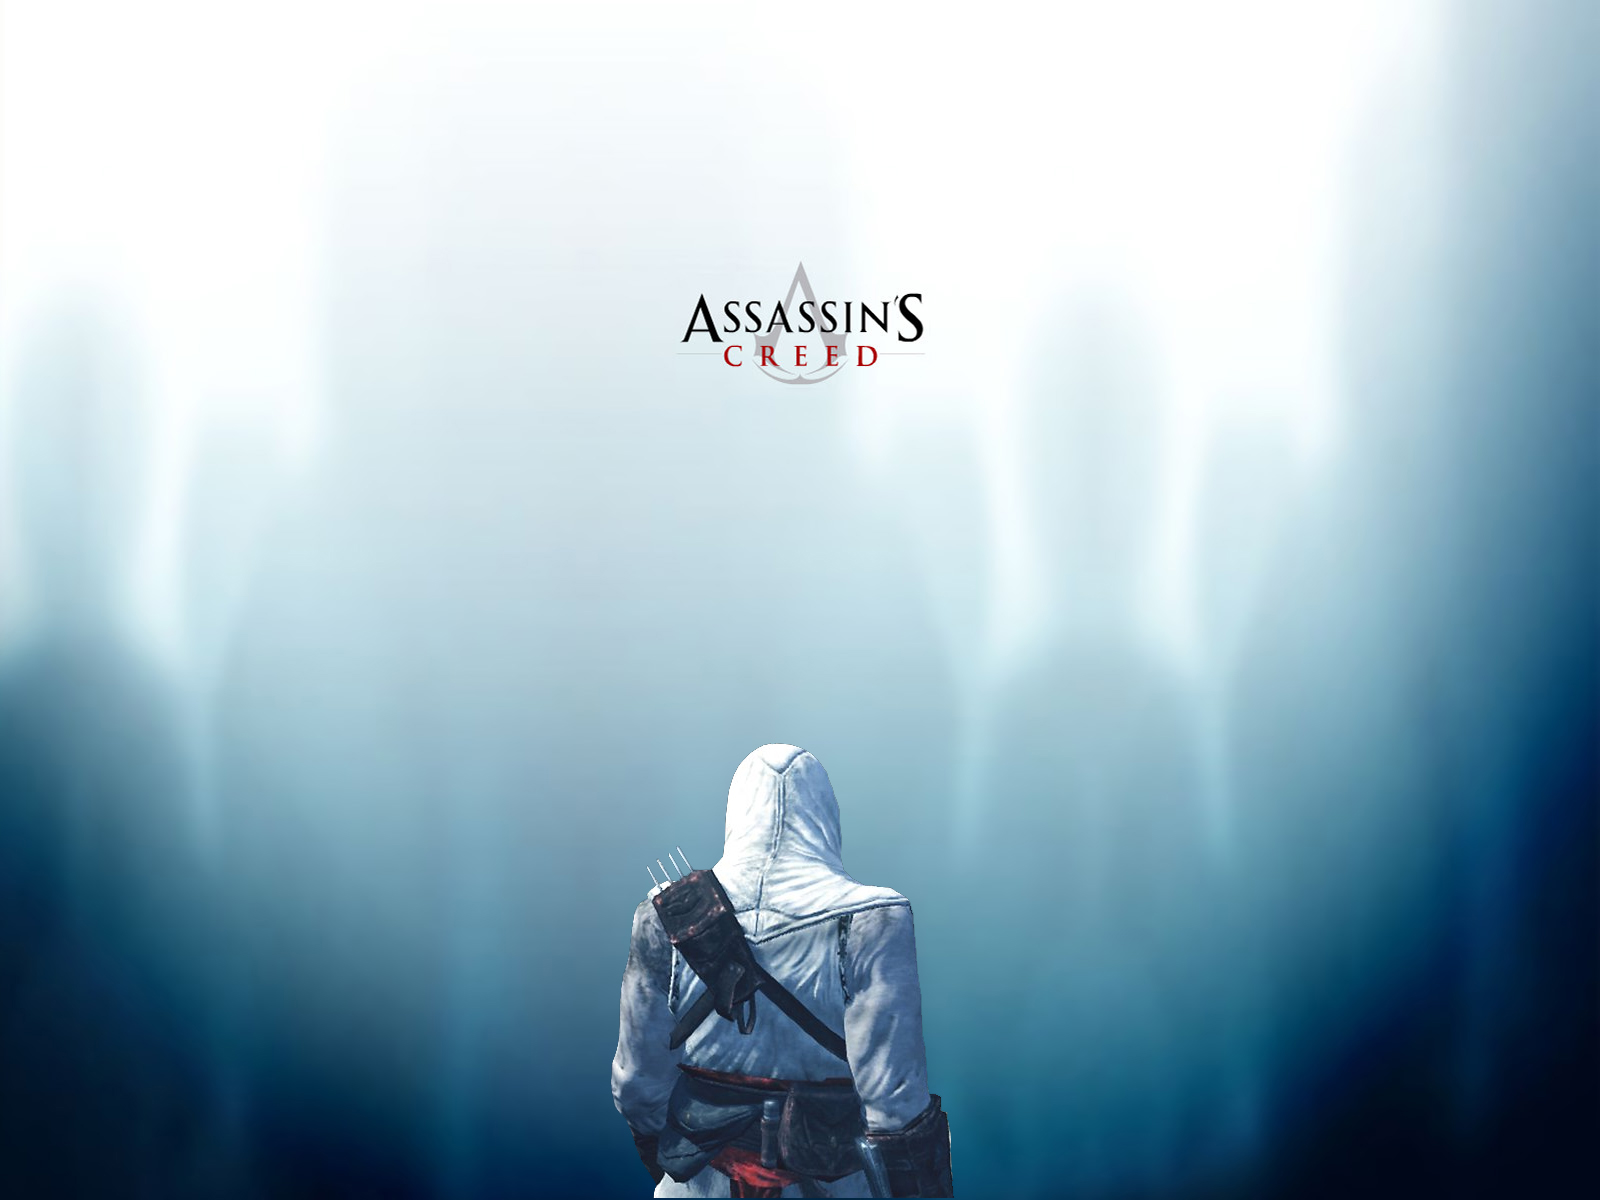 Brotherhood Full Hd Wallpapers - Assassin's Creed 1 Background - 1600x1200  Wallpaper 